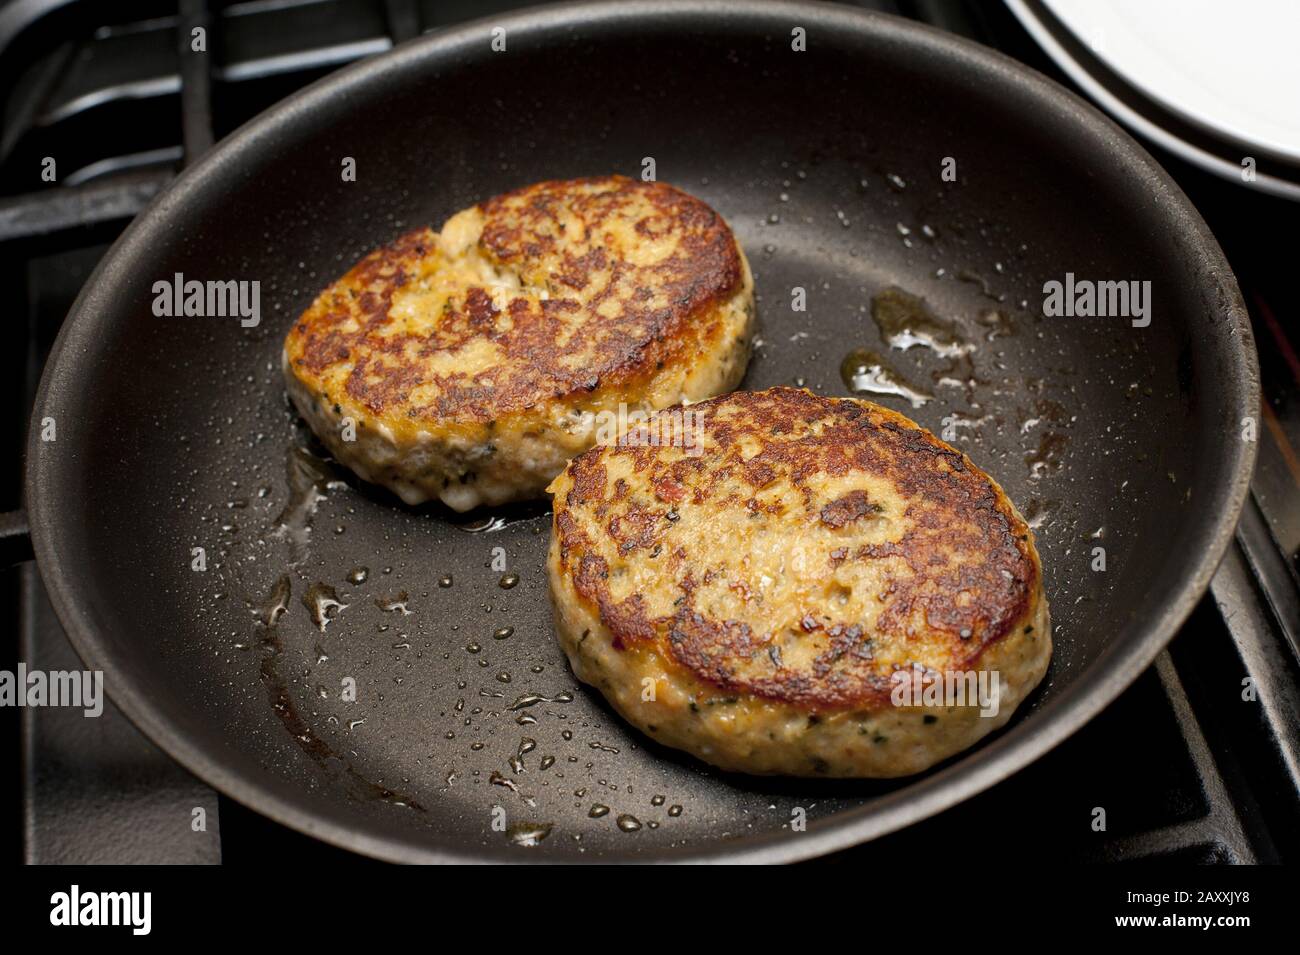 Close up on two round well cooked fried fish patties in non-stick pan with light coating of oil Stock Photo